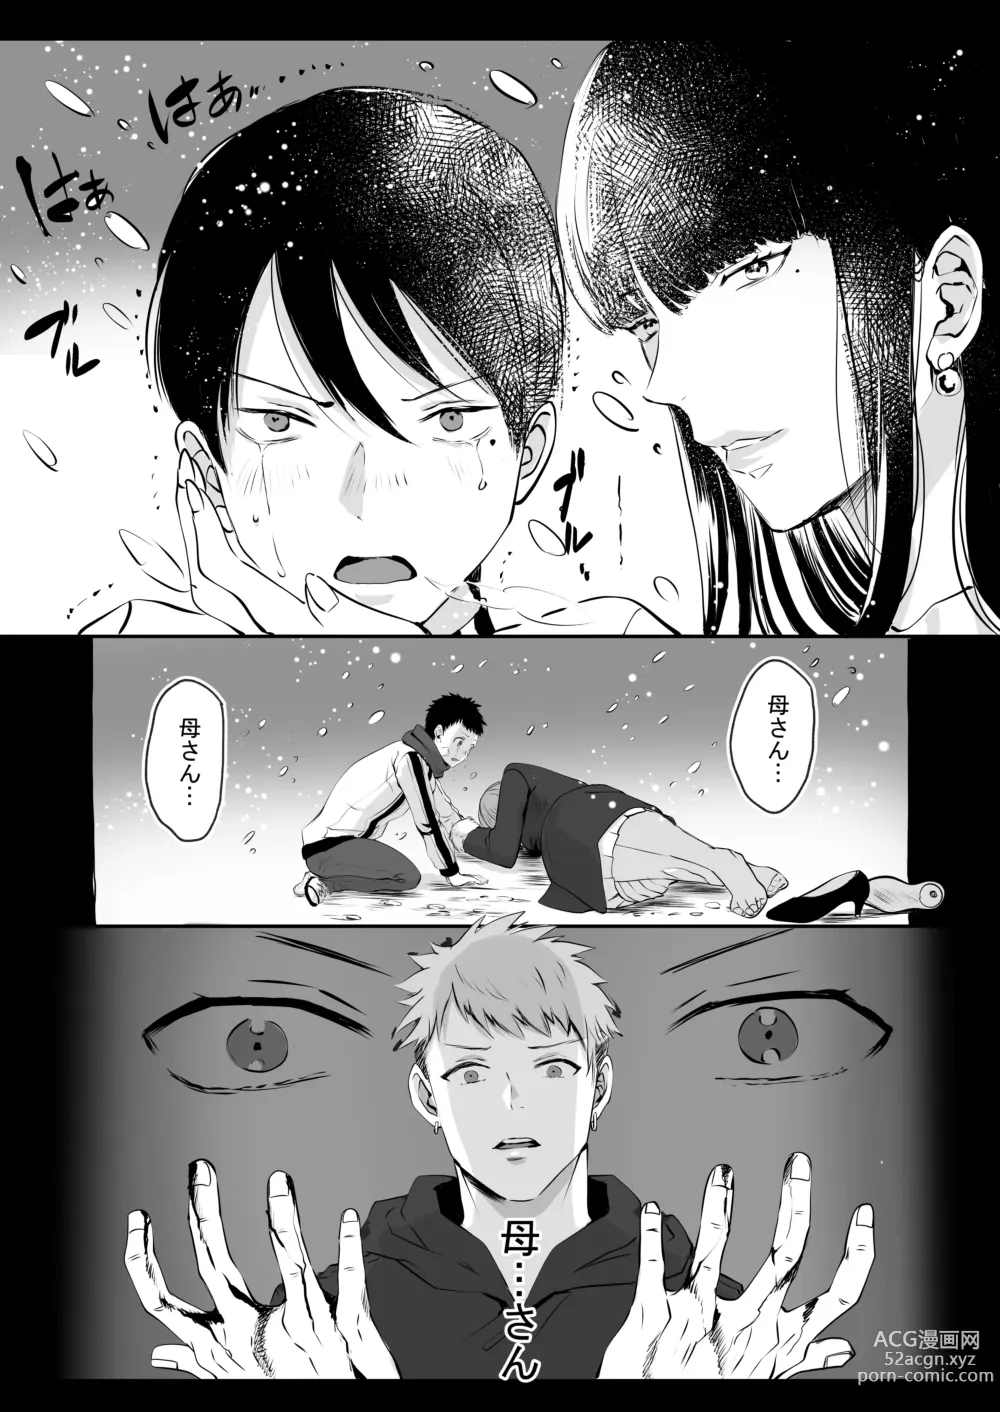 Page 11 of doujinshi Im crazy for you.